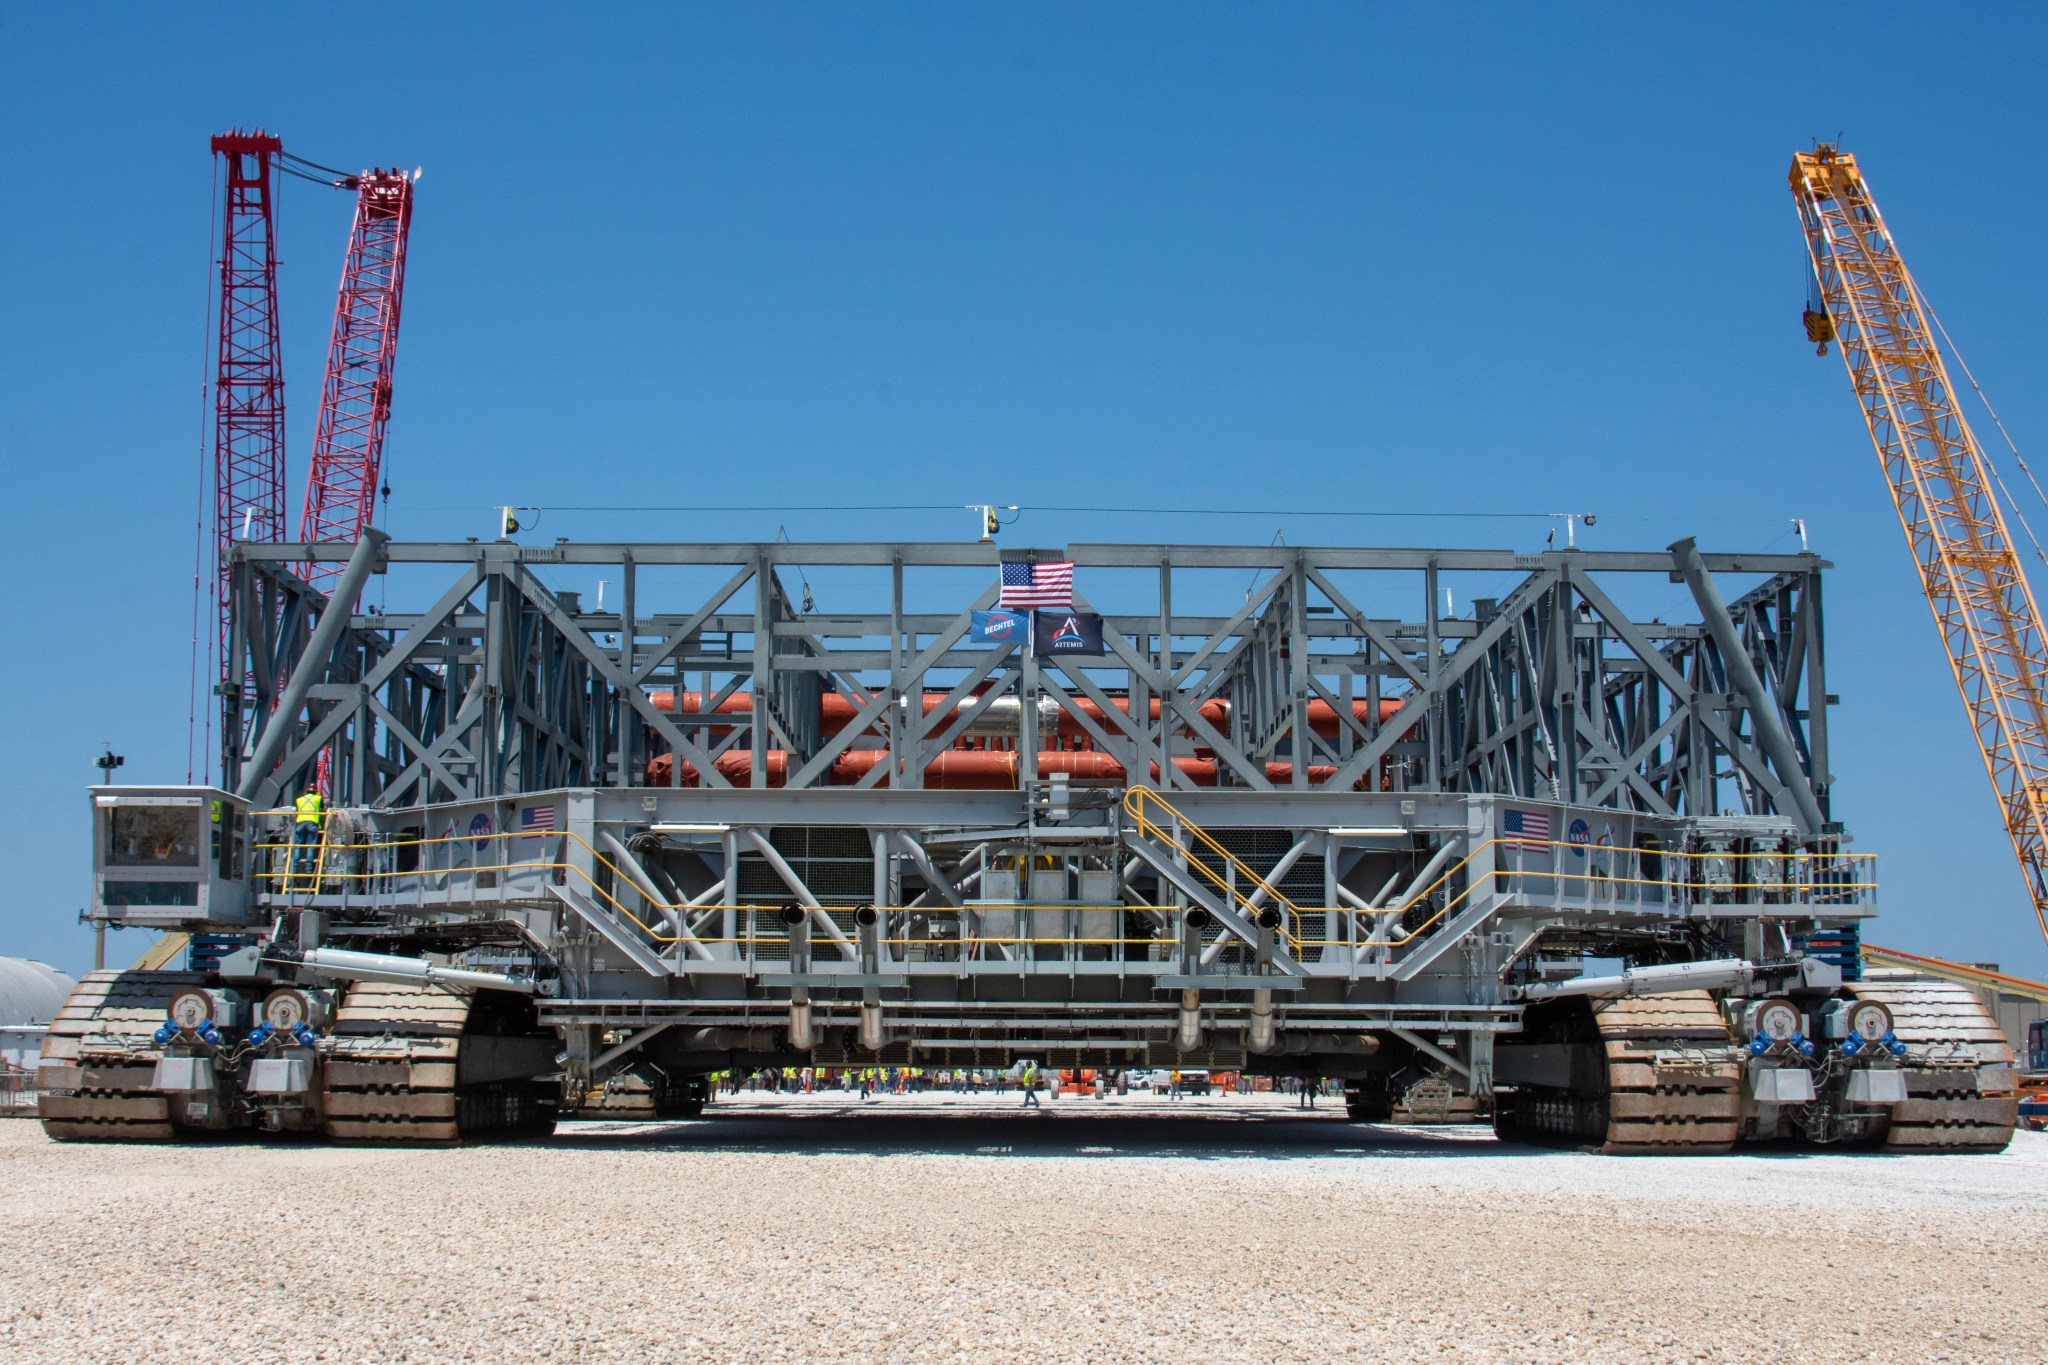 Image shows base structure of mobile launcher 2 at Kennedy Space Center in Florida.